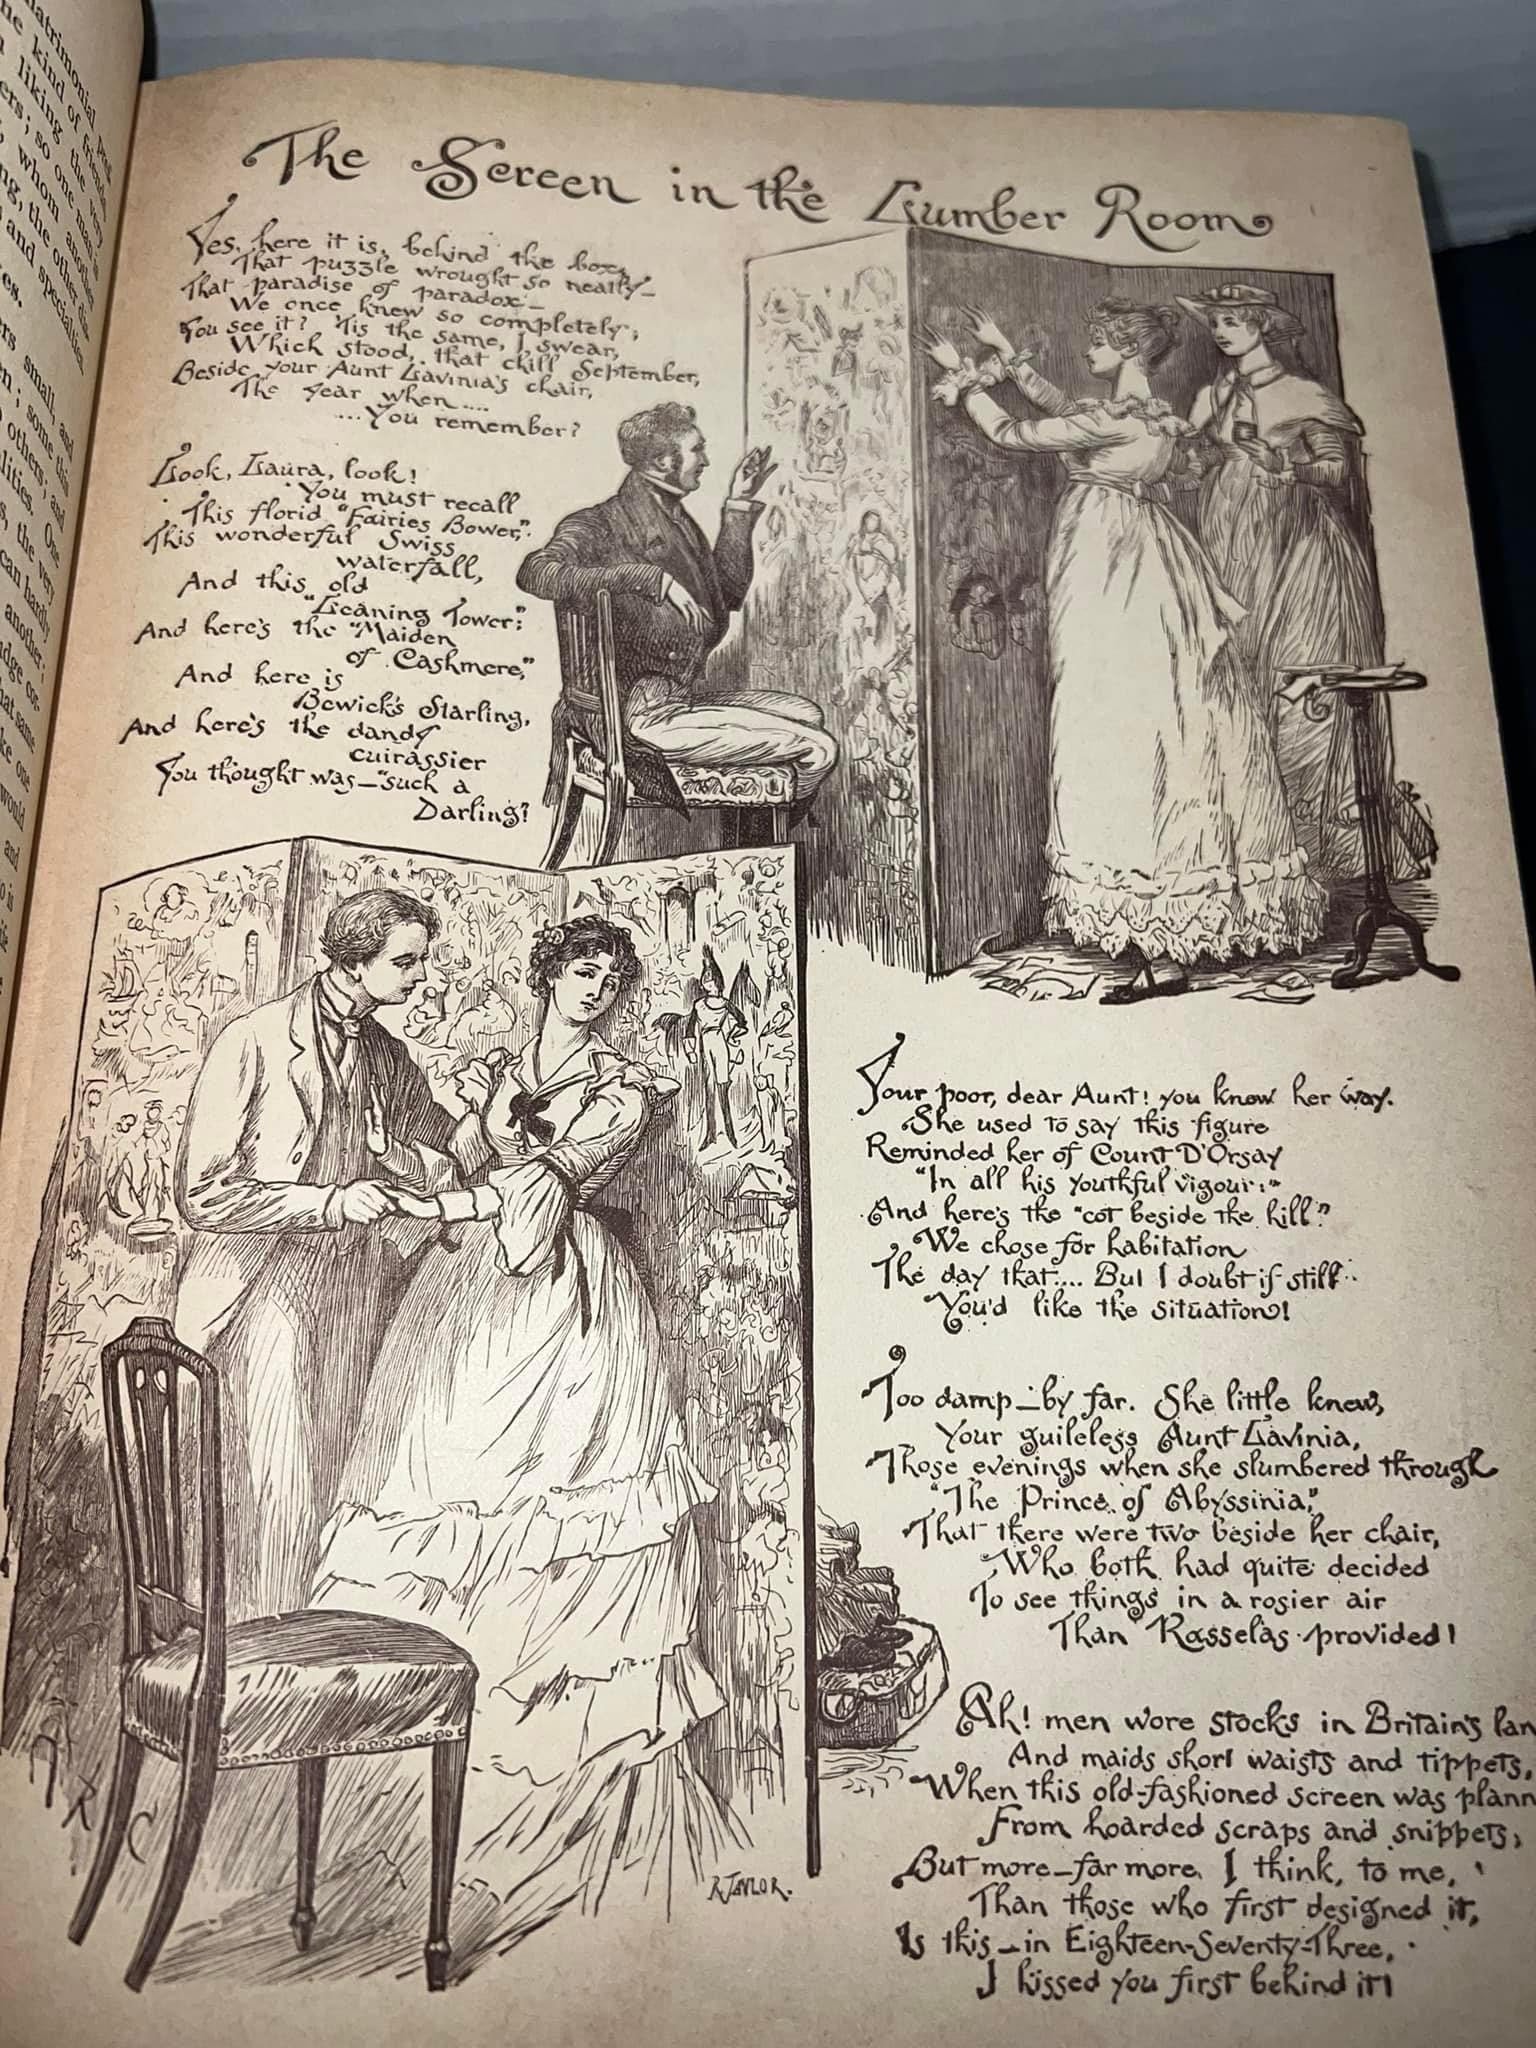 Antique Victorian etiquette 1893 1st edition The home educator book illustrated